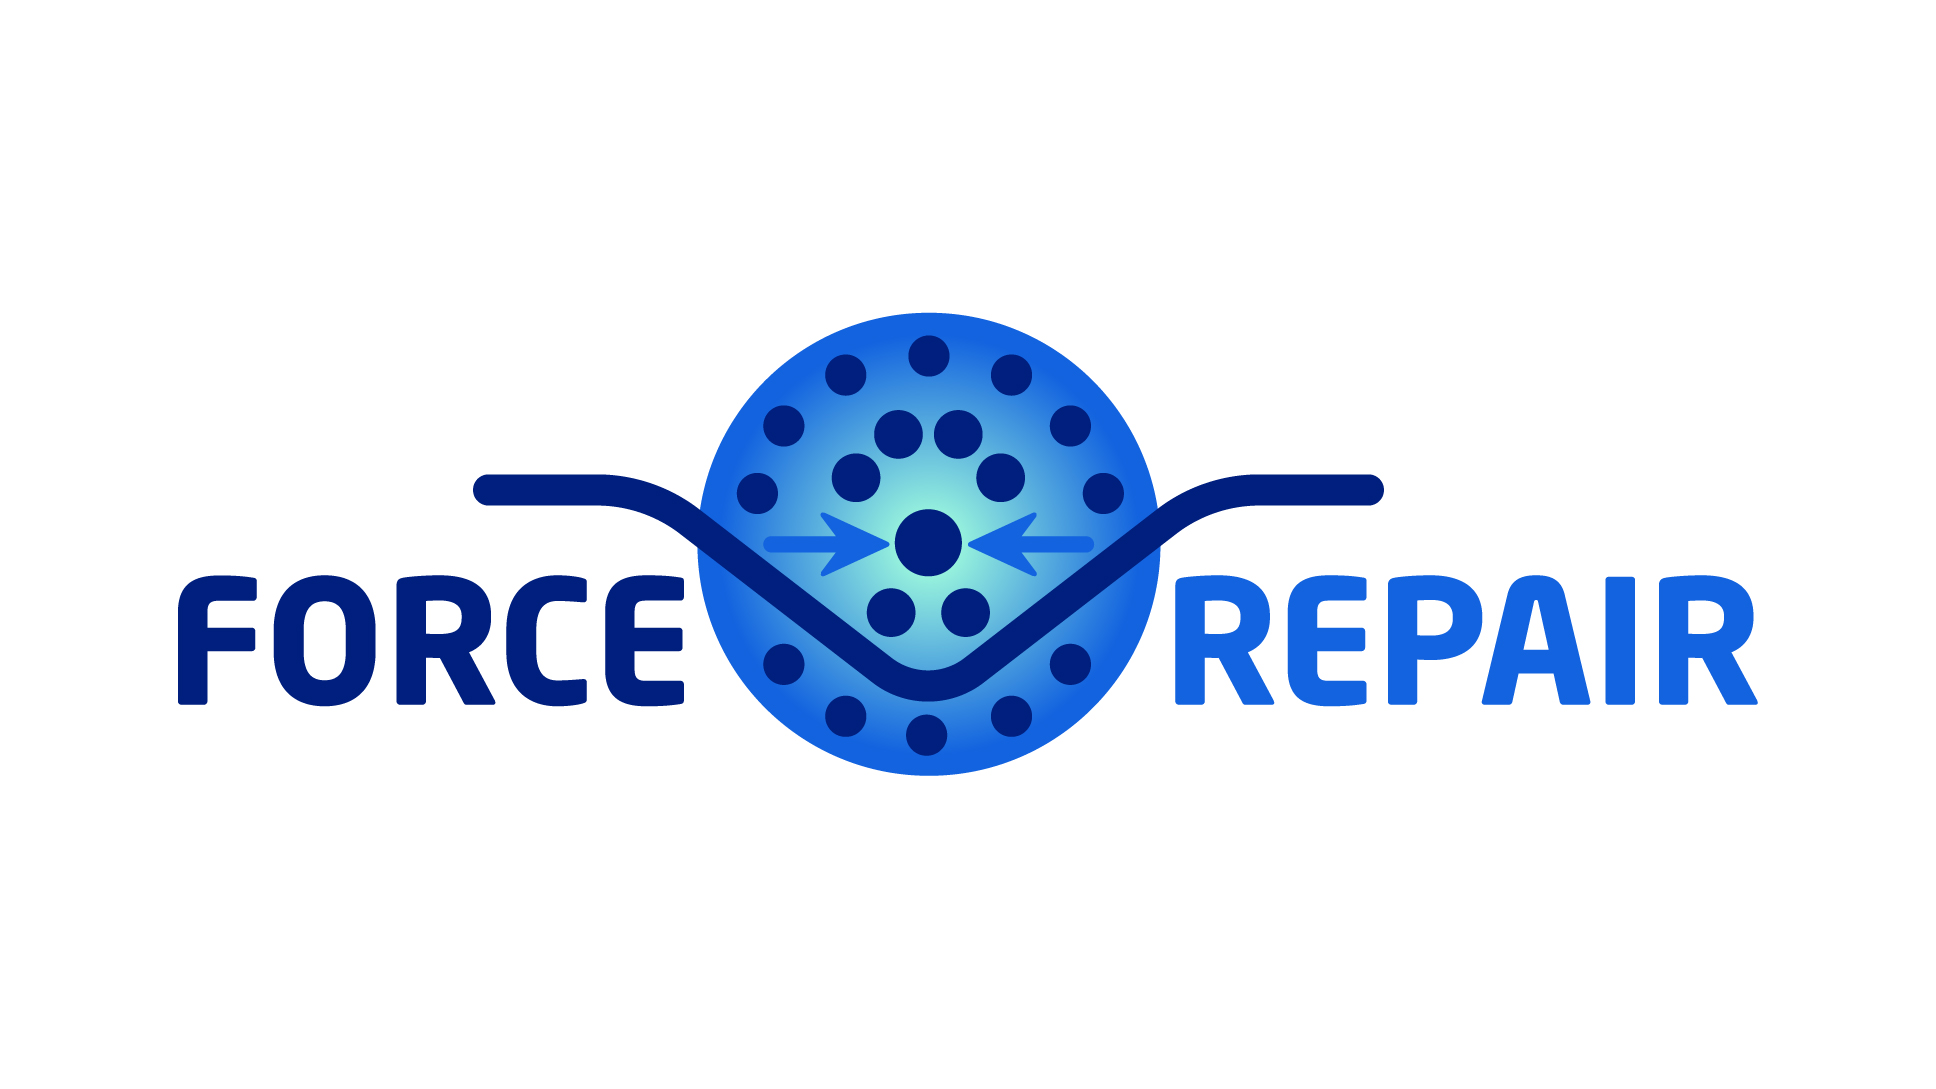 Vicomtech collaborates in the European project FORCE REPAIR, which focuses on the innovative treatment of chronic wounds.